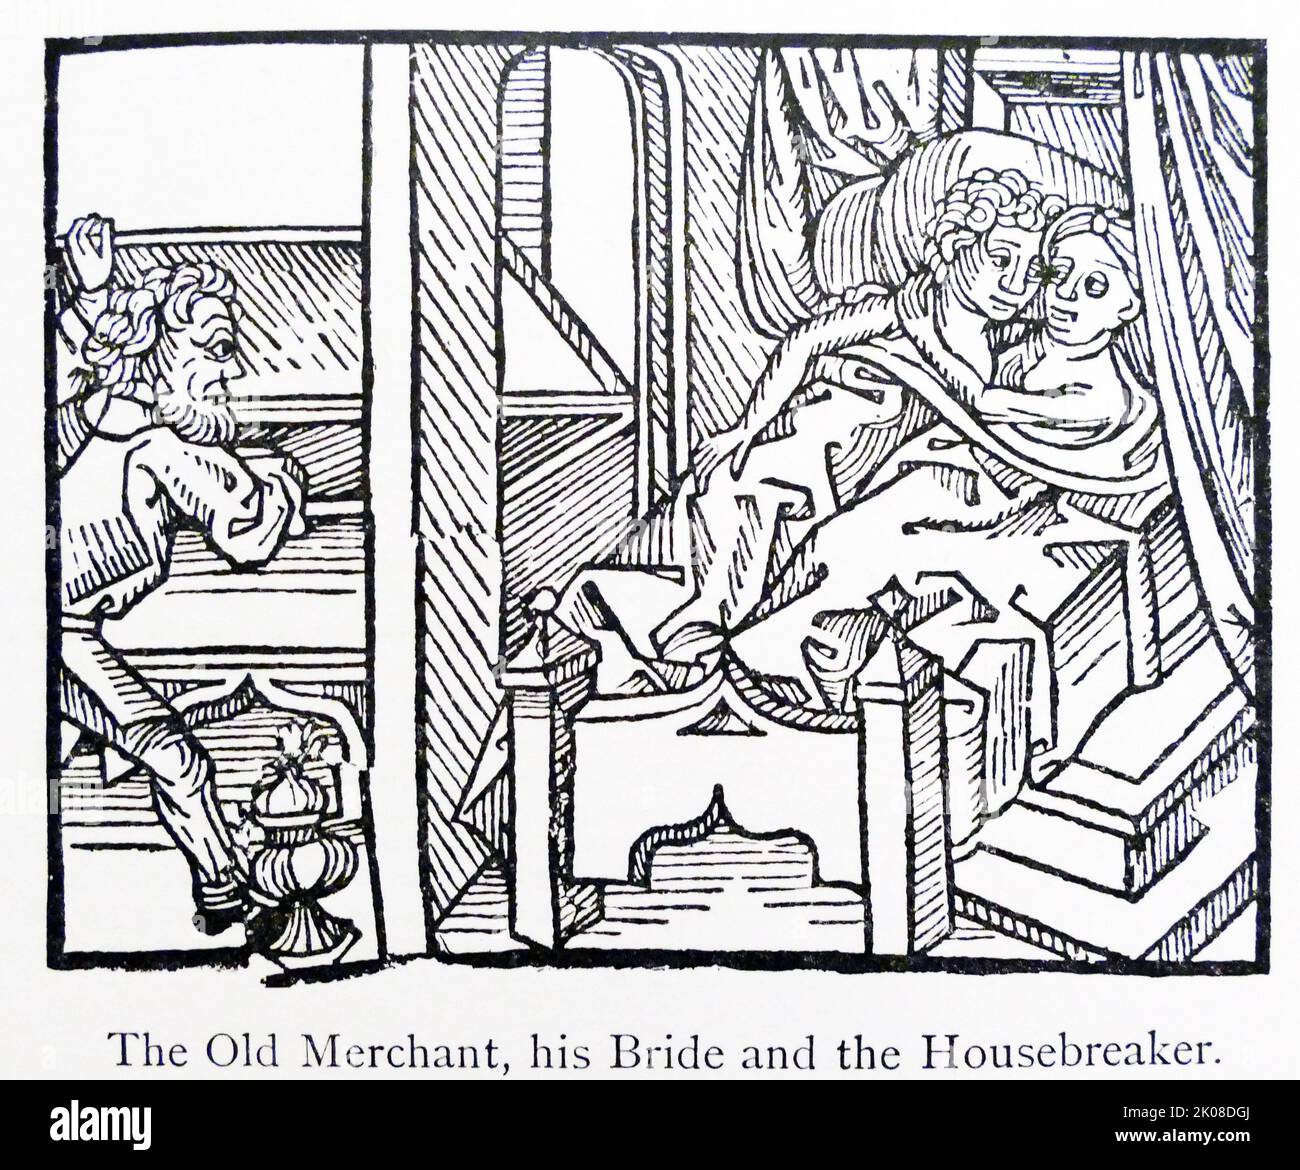 The old merchant, his bride and the housekeeper. 15th century Illustration Stock Photo